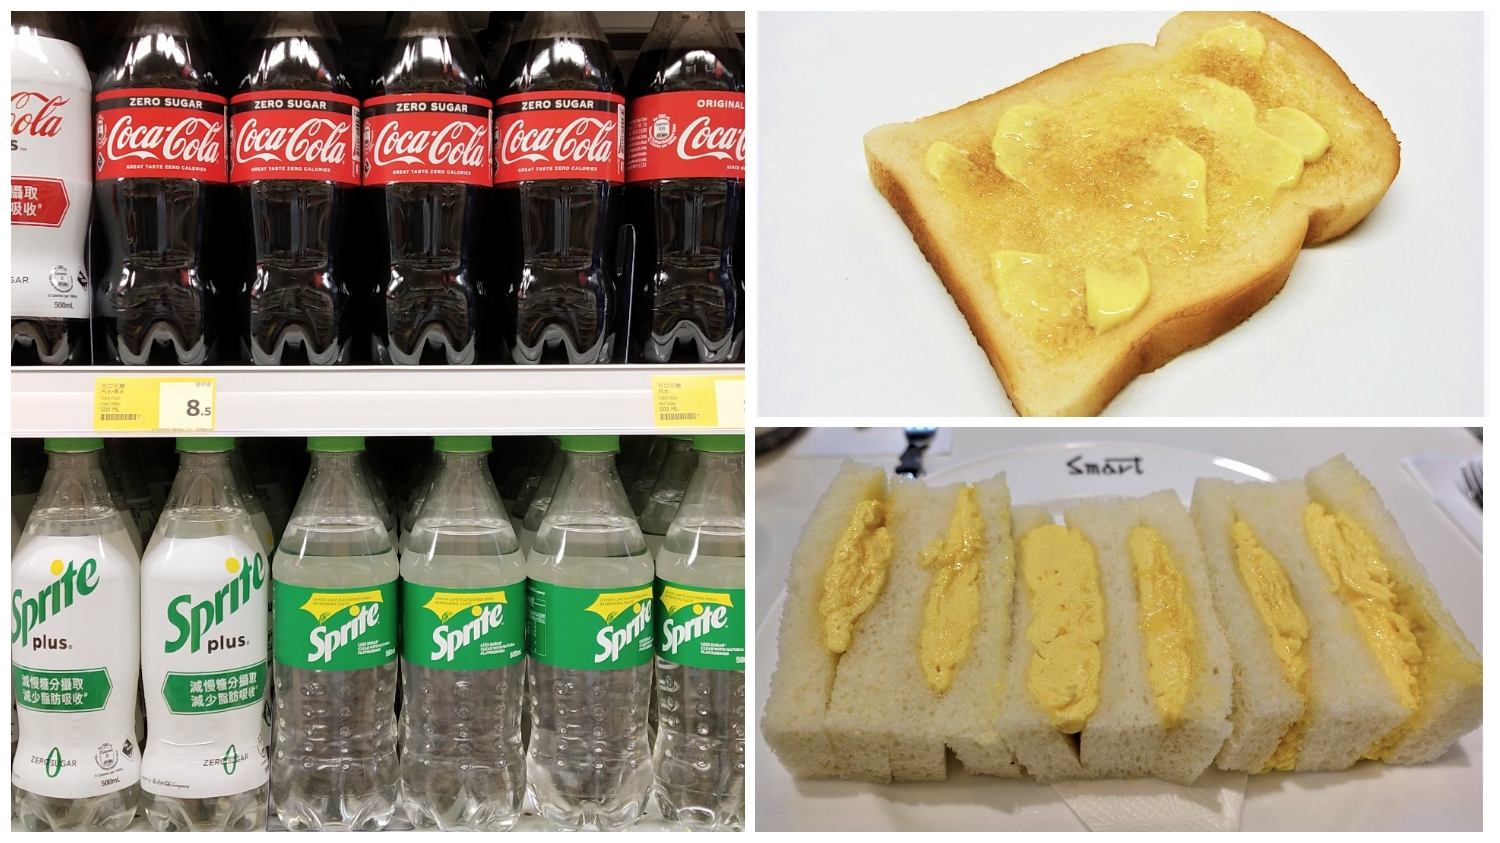 How to say soda, butter toast, egg sandwich in Cantonese and what do they stand for now?